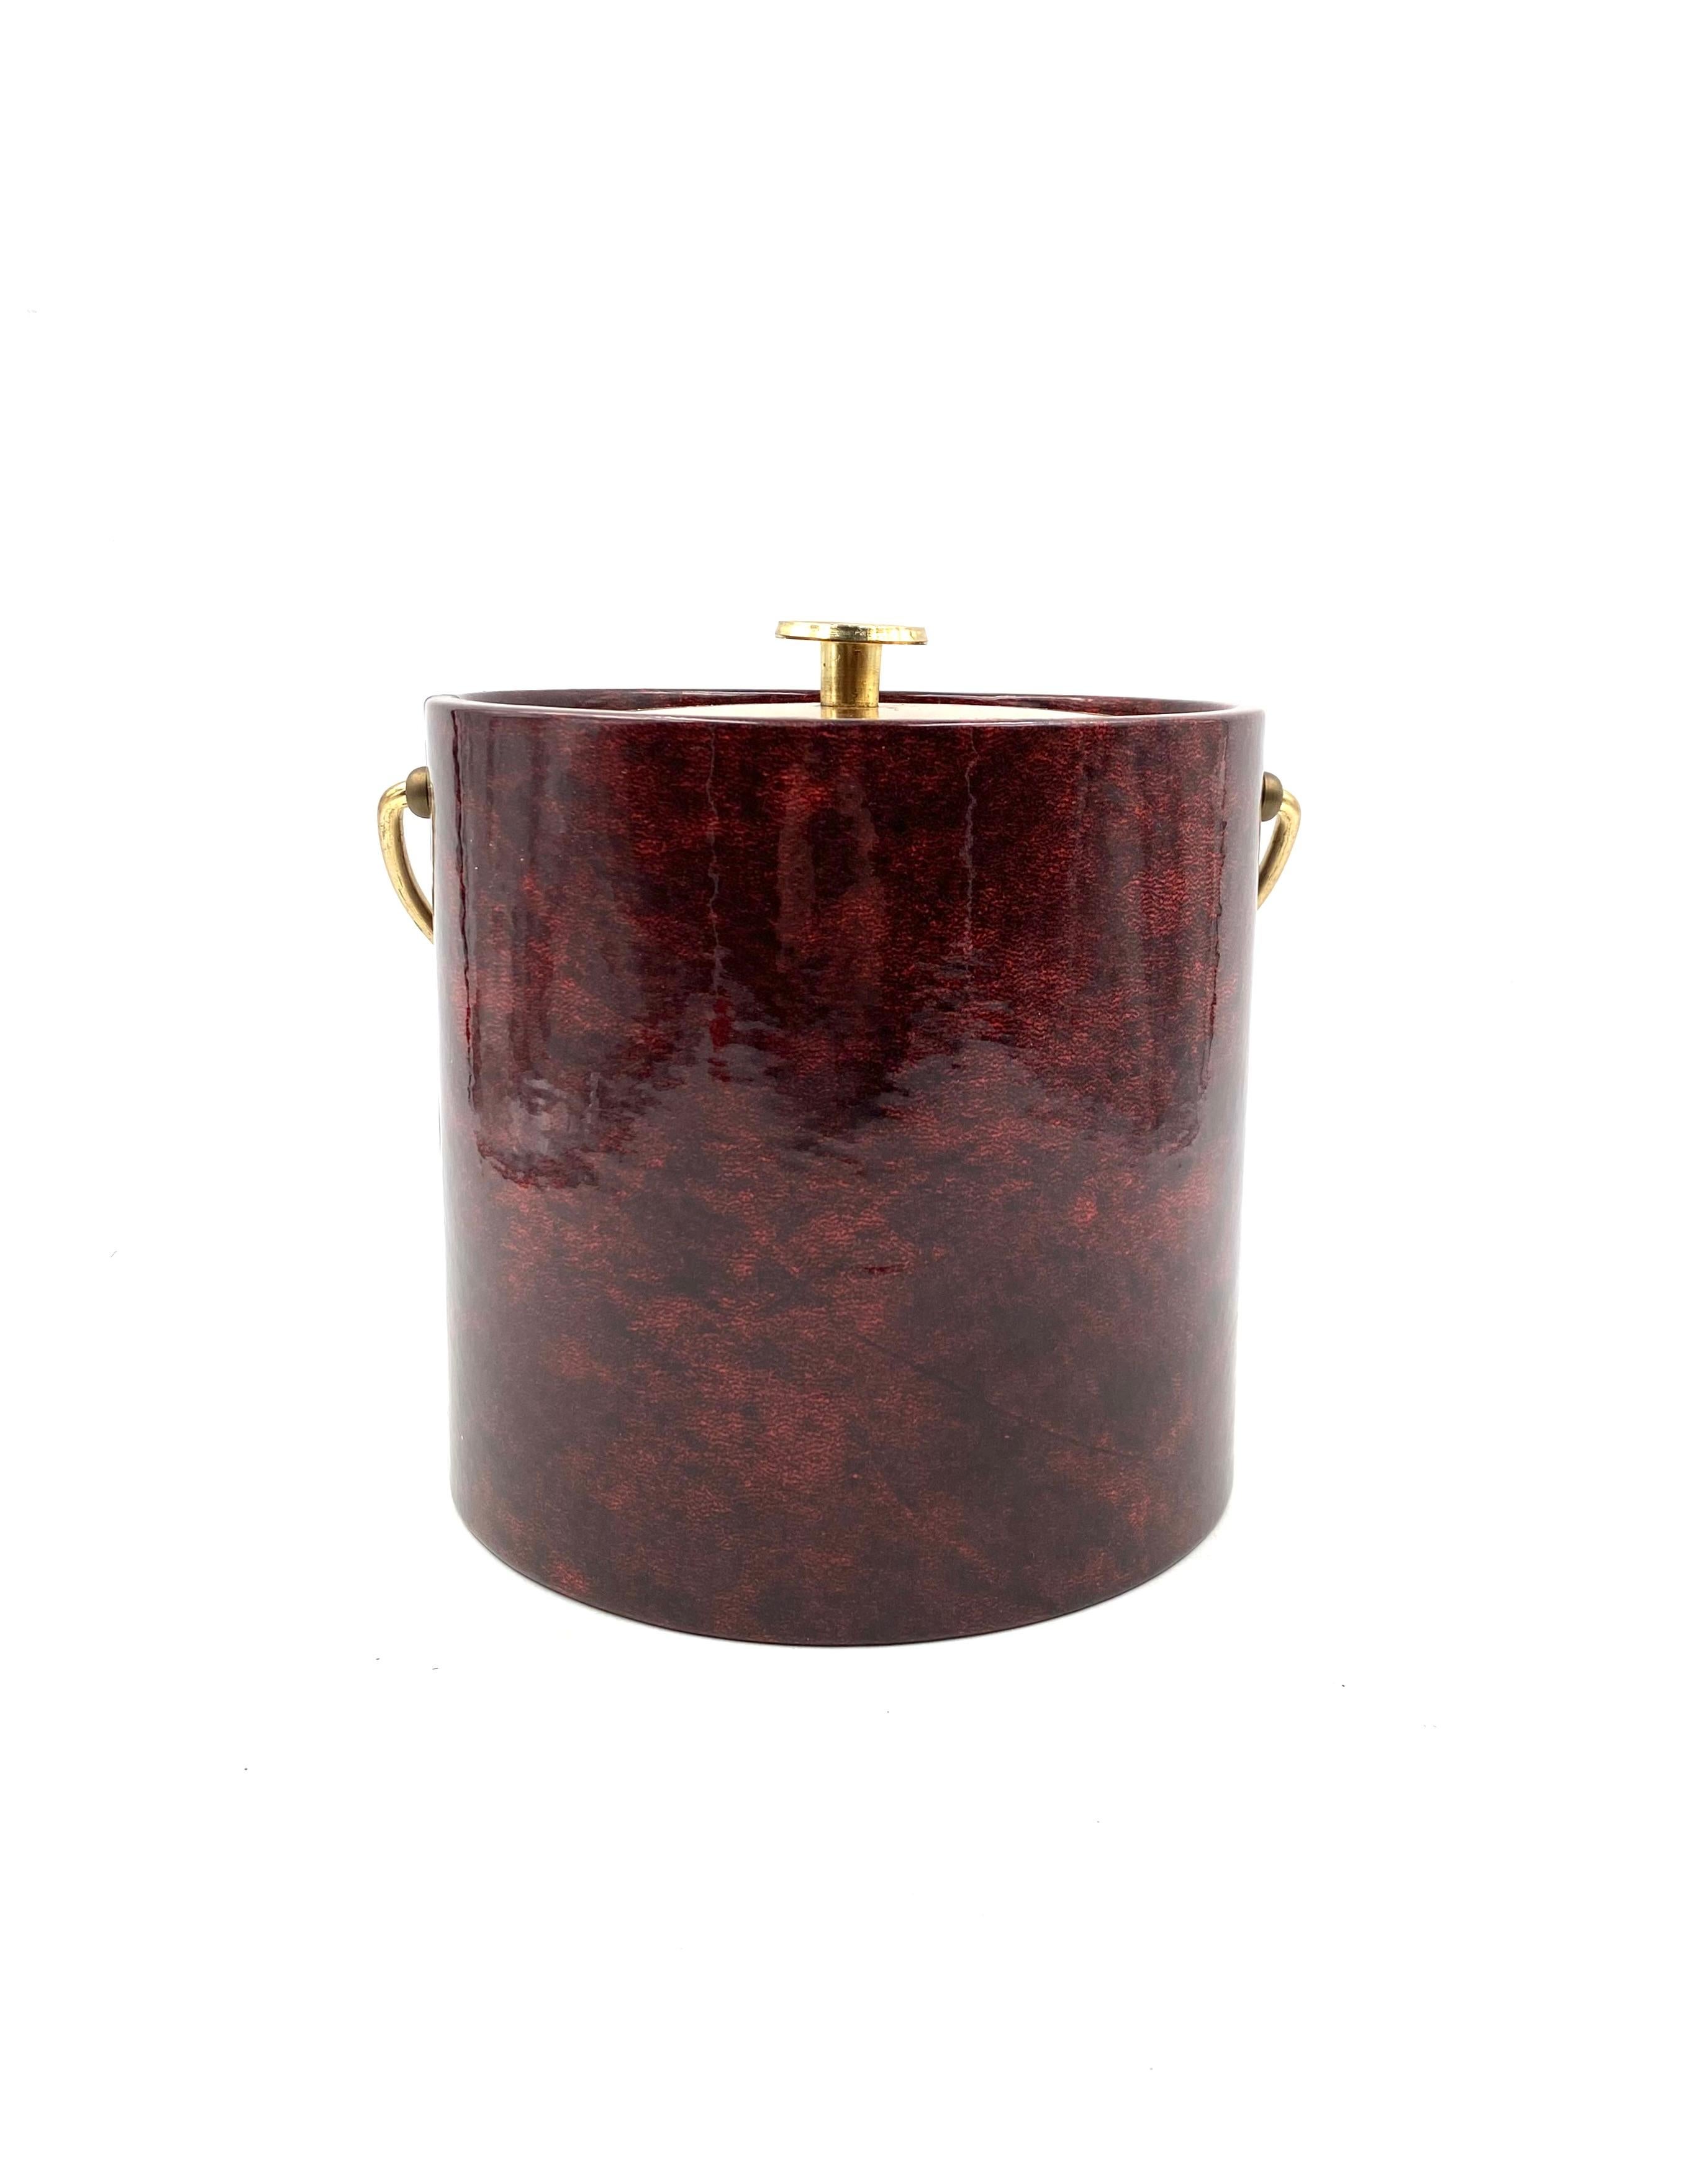 Aldo Tura, Brass and dark red parchment cooler / Icebucket

Italy 1960s

h 24 cm - diam. 20 cm

Conditions: excellent consistent with age and use.